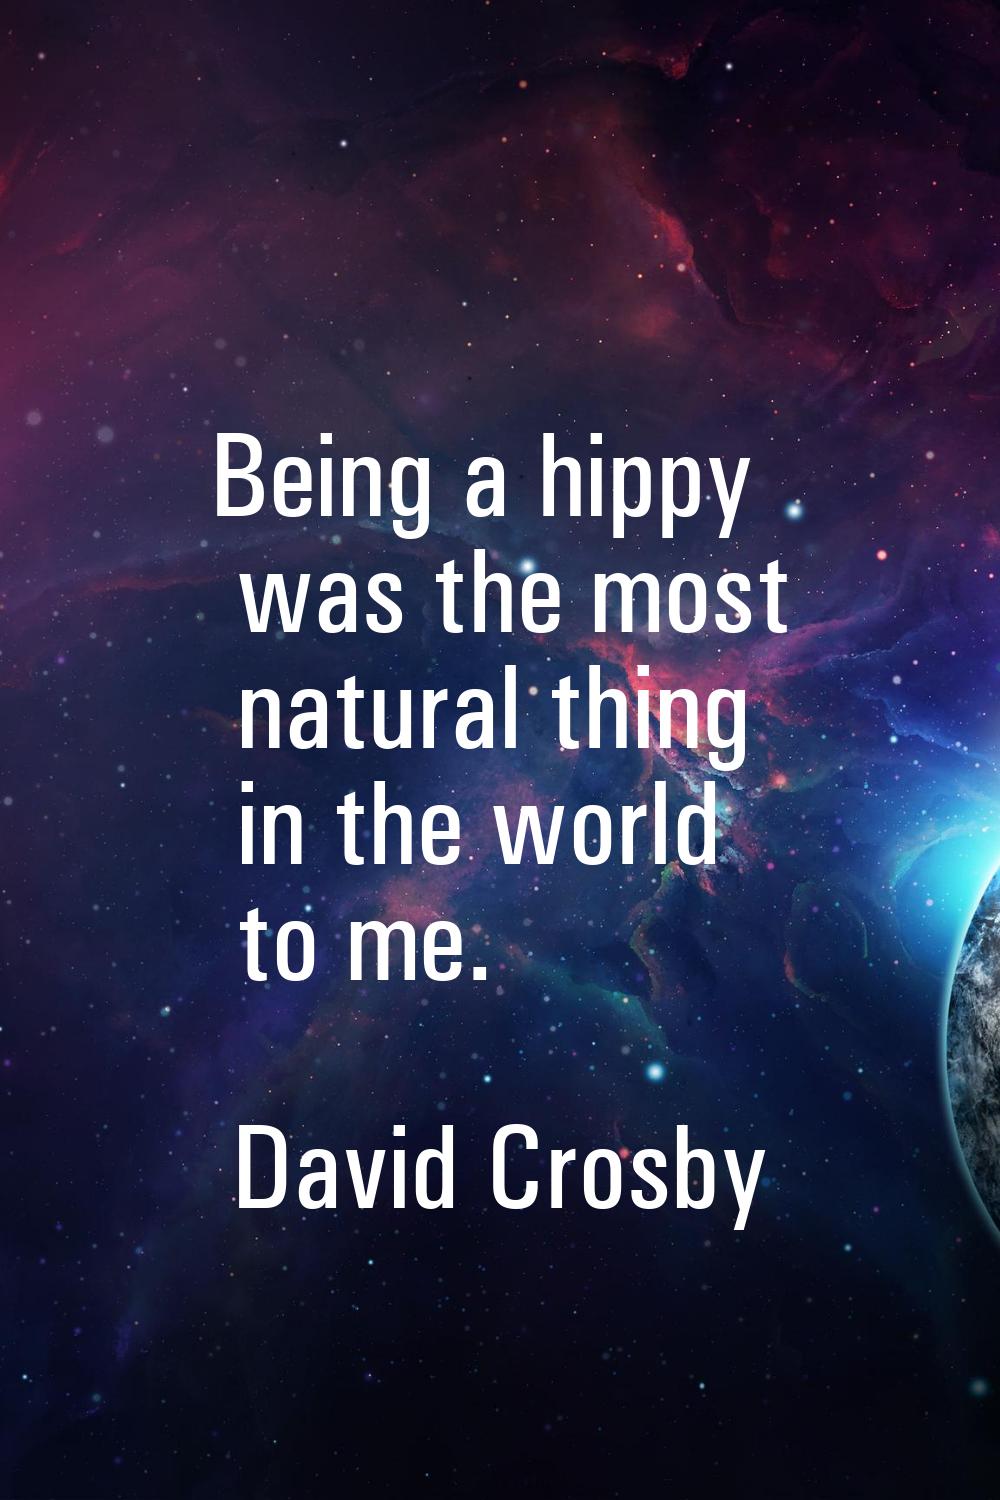 Being a hippy was the most natural thing in the world to me.